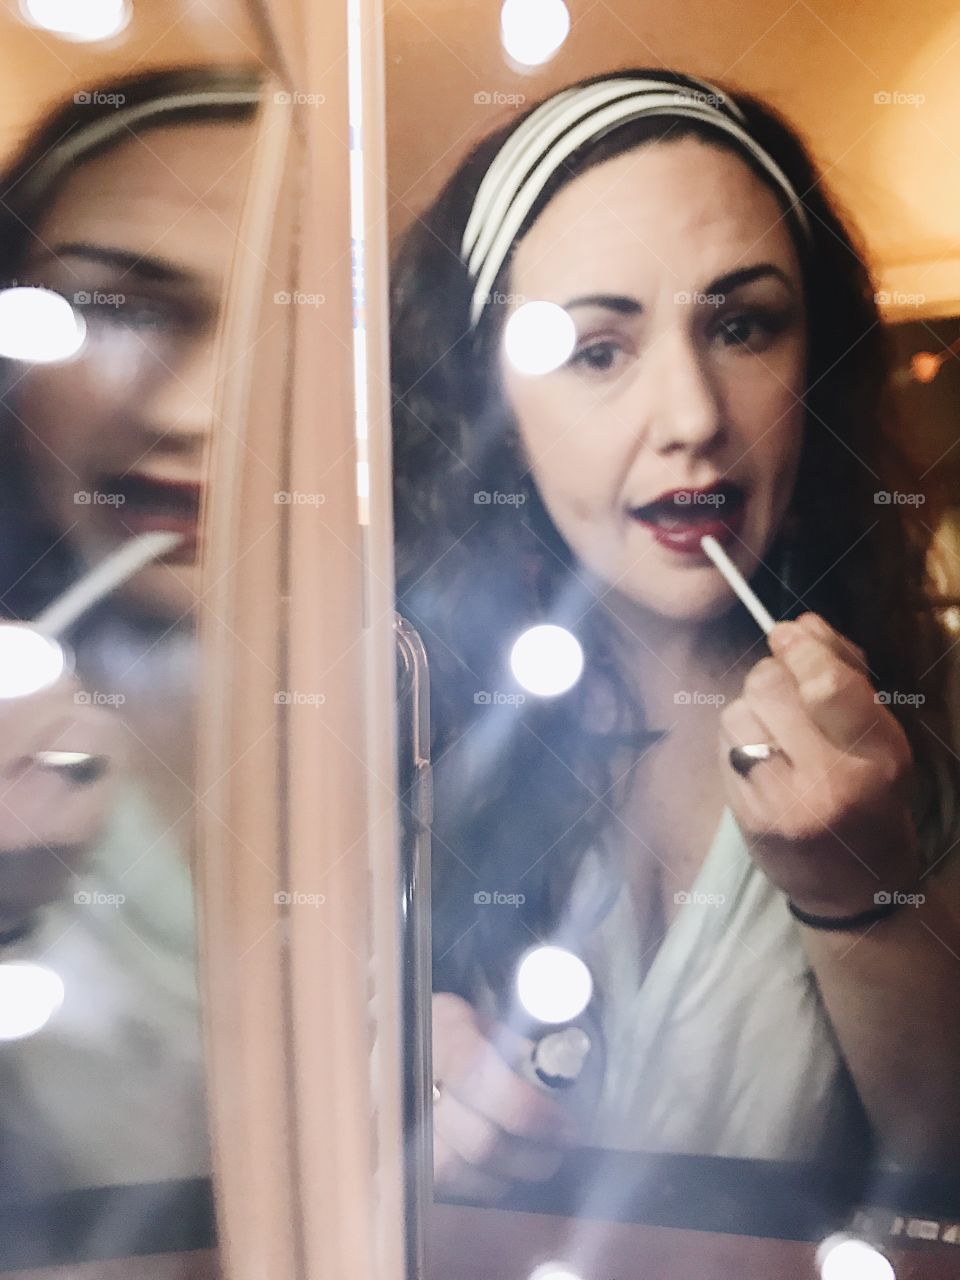 Looking in the lighted mirror and putting on my lipstick with my long, curly hair down and tied back with a headband. 